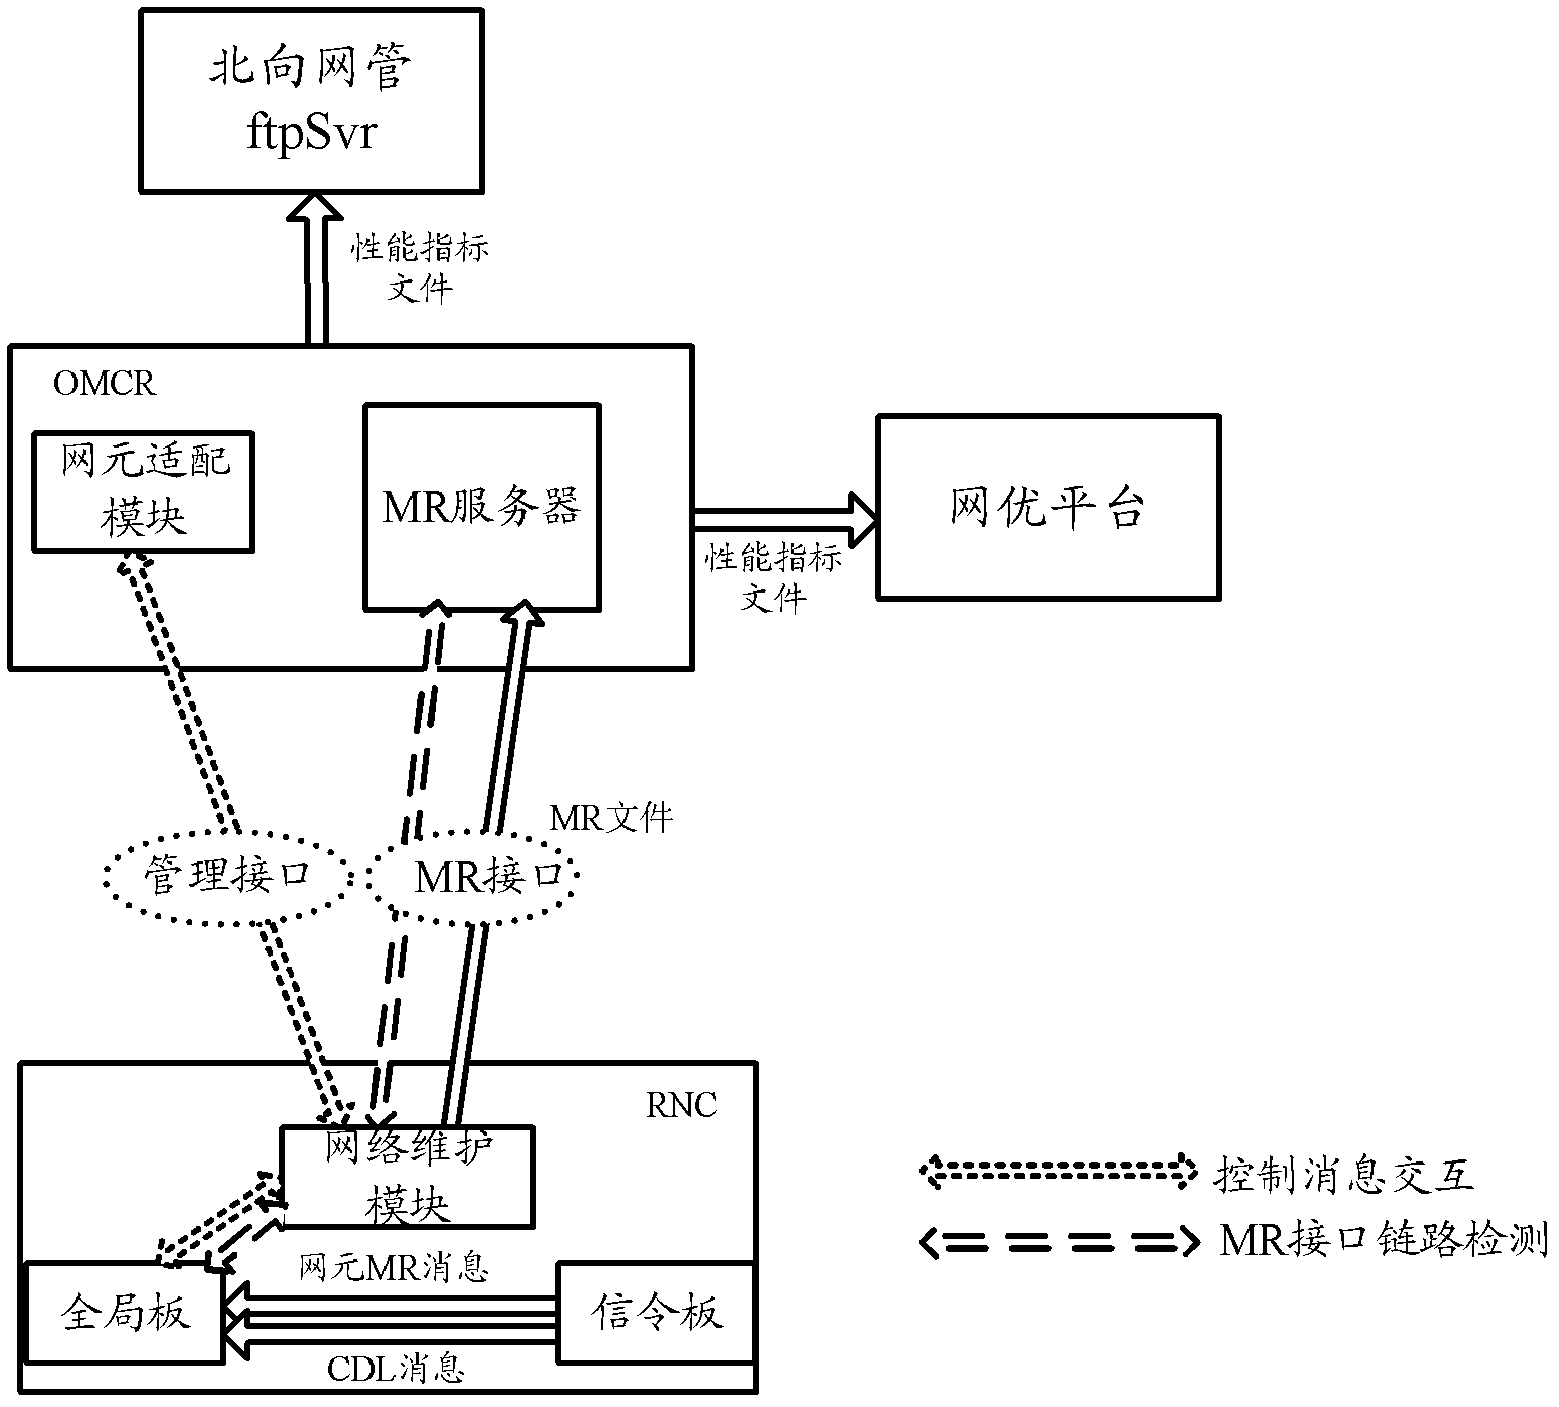 Network element and method for uploading MR (Measure Report) messages by network element